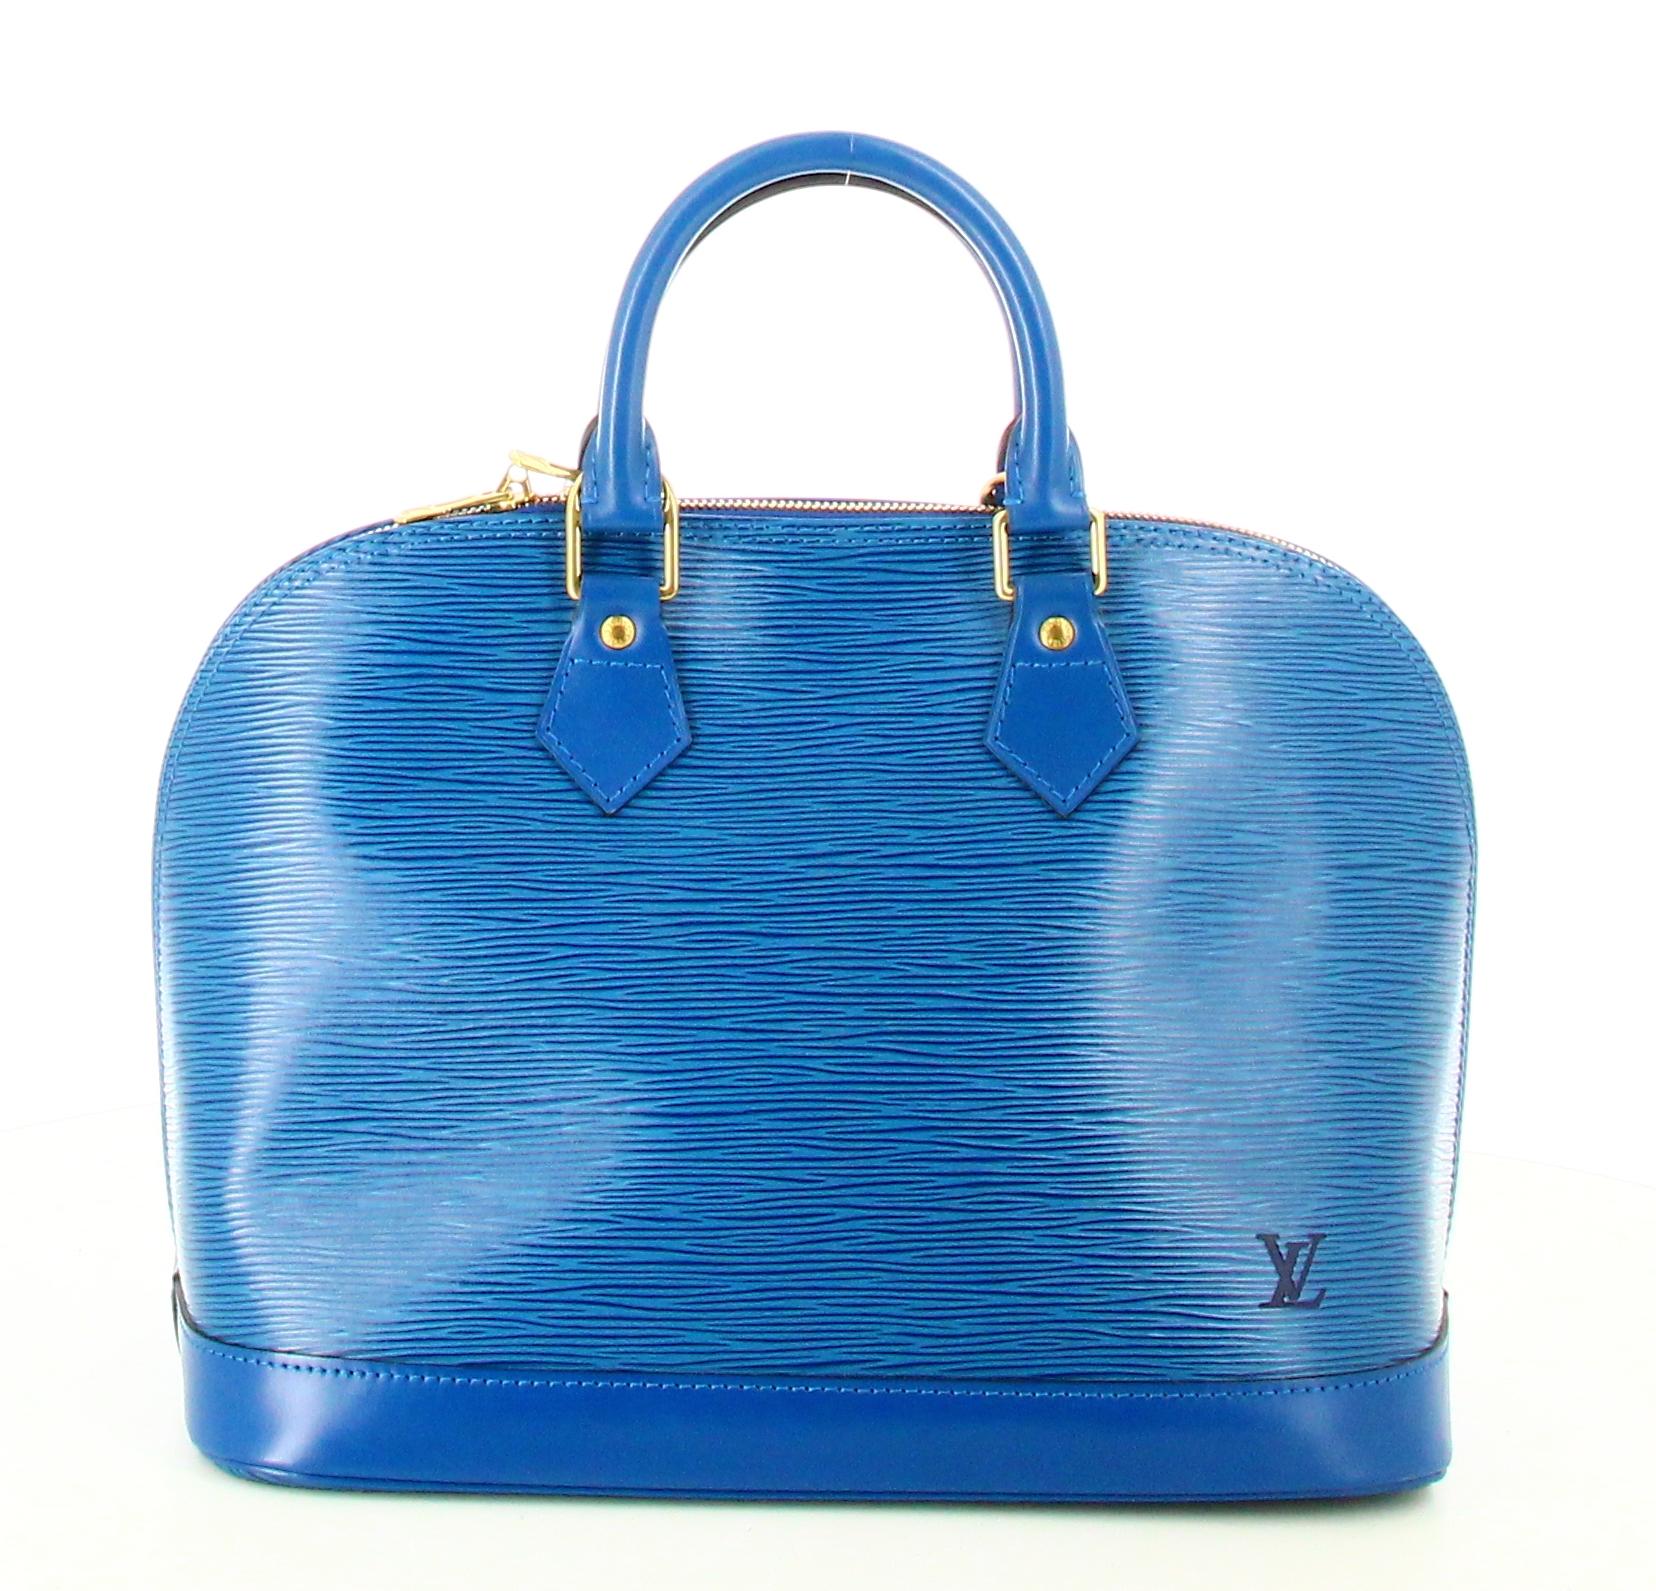 1996 Louis Vuitton Alma Bag Epi Blue Leather 

- Very good condition. Shows no signs of wear over time.
- Louis Vuitton Alma Bag 
- Blue epi leather
- Two small blue leather straps 
- Inside: blue suede plus a small inside pocket